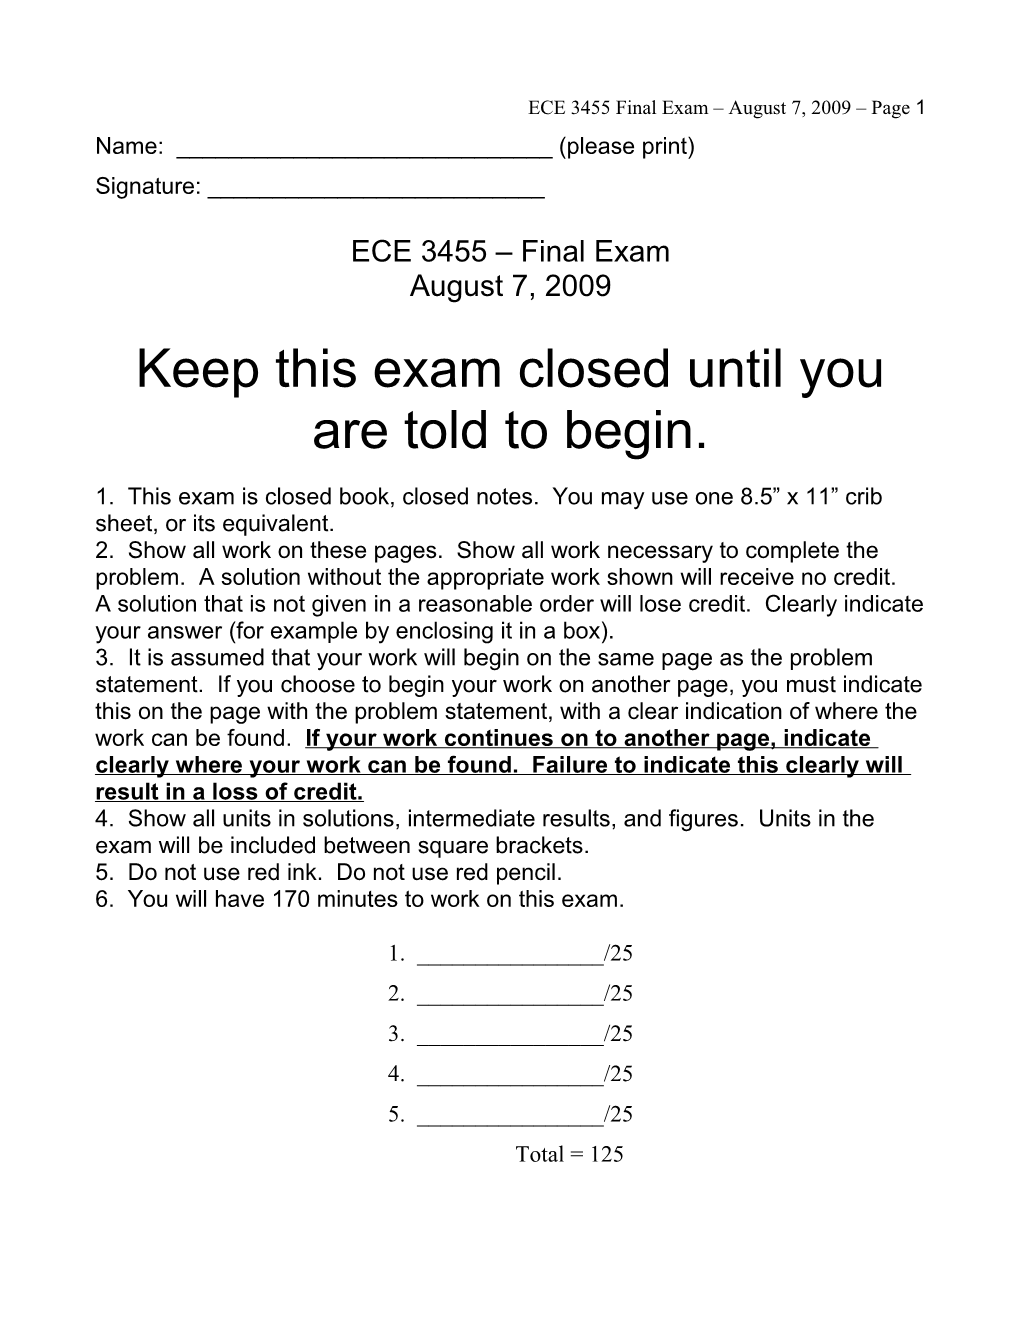 ECE 3455 Final Exam August 7, 2009 Page 1